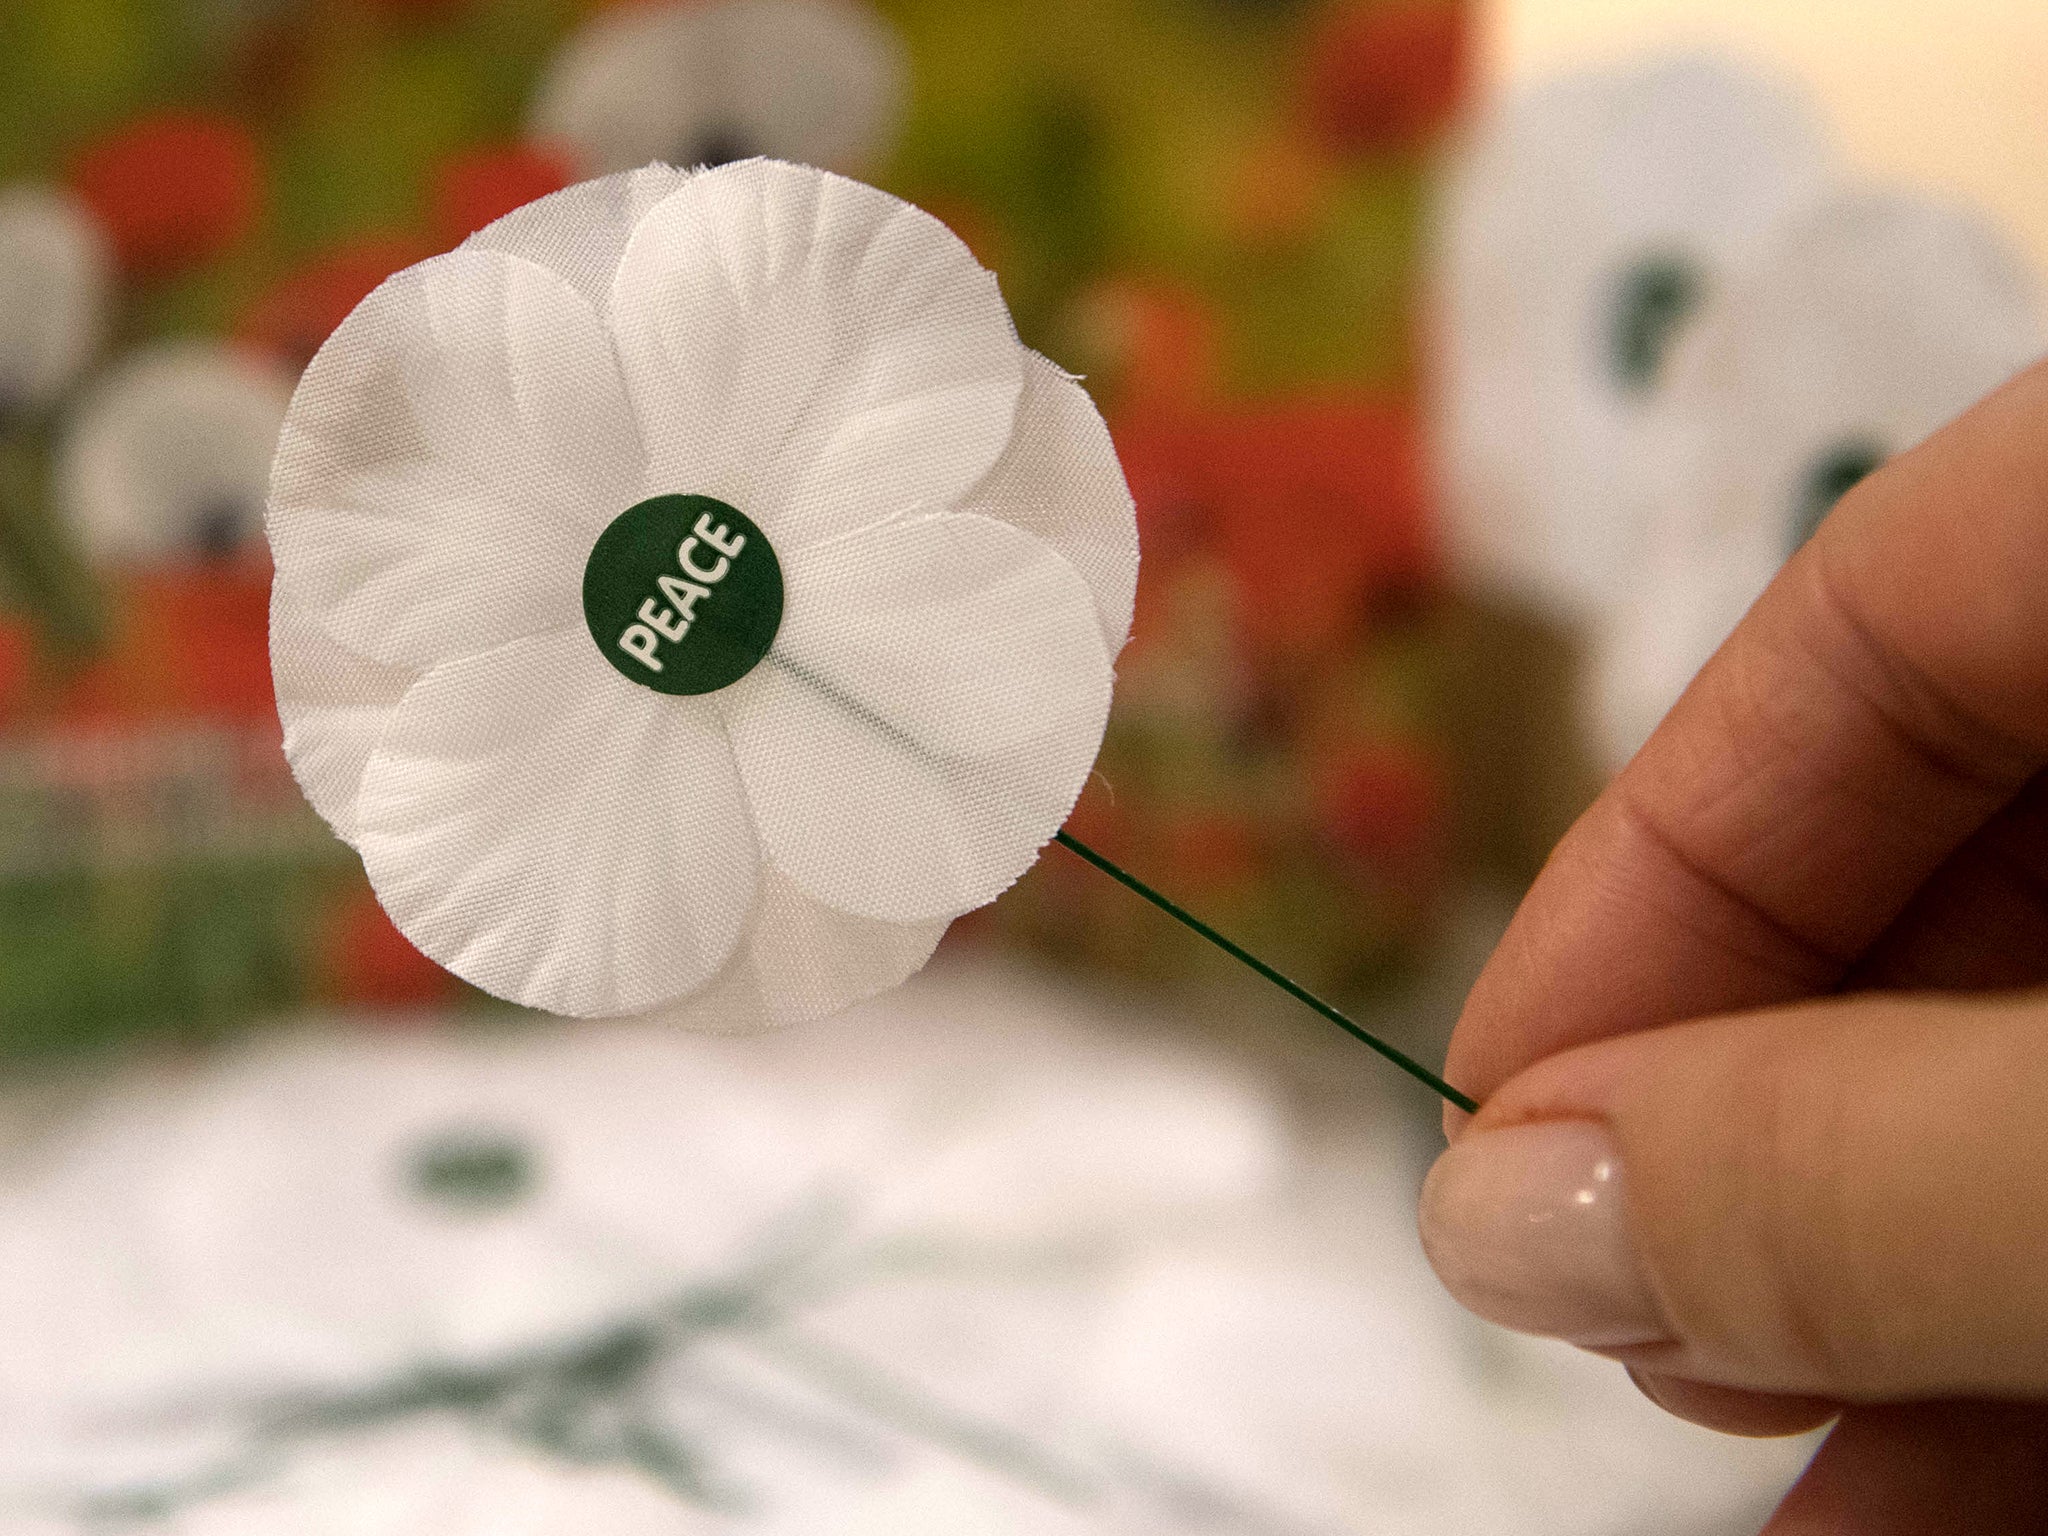 Military veterans demand Tory minister apologises for calling white poppies 'attention seeking rubbish'